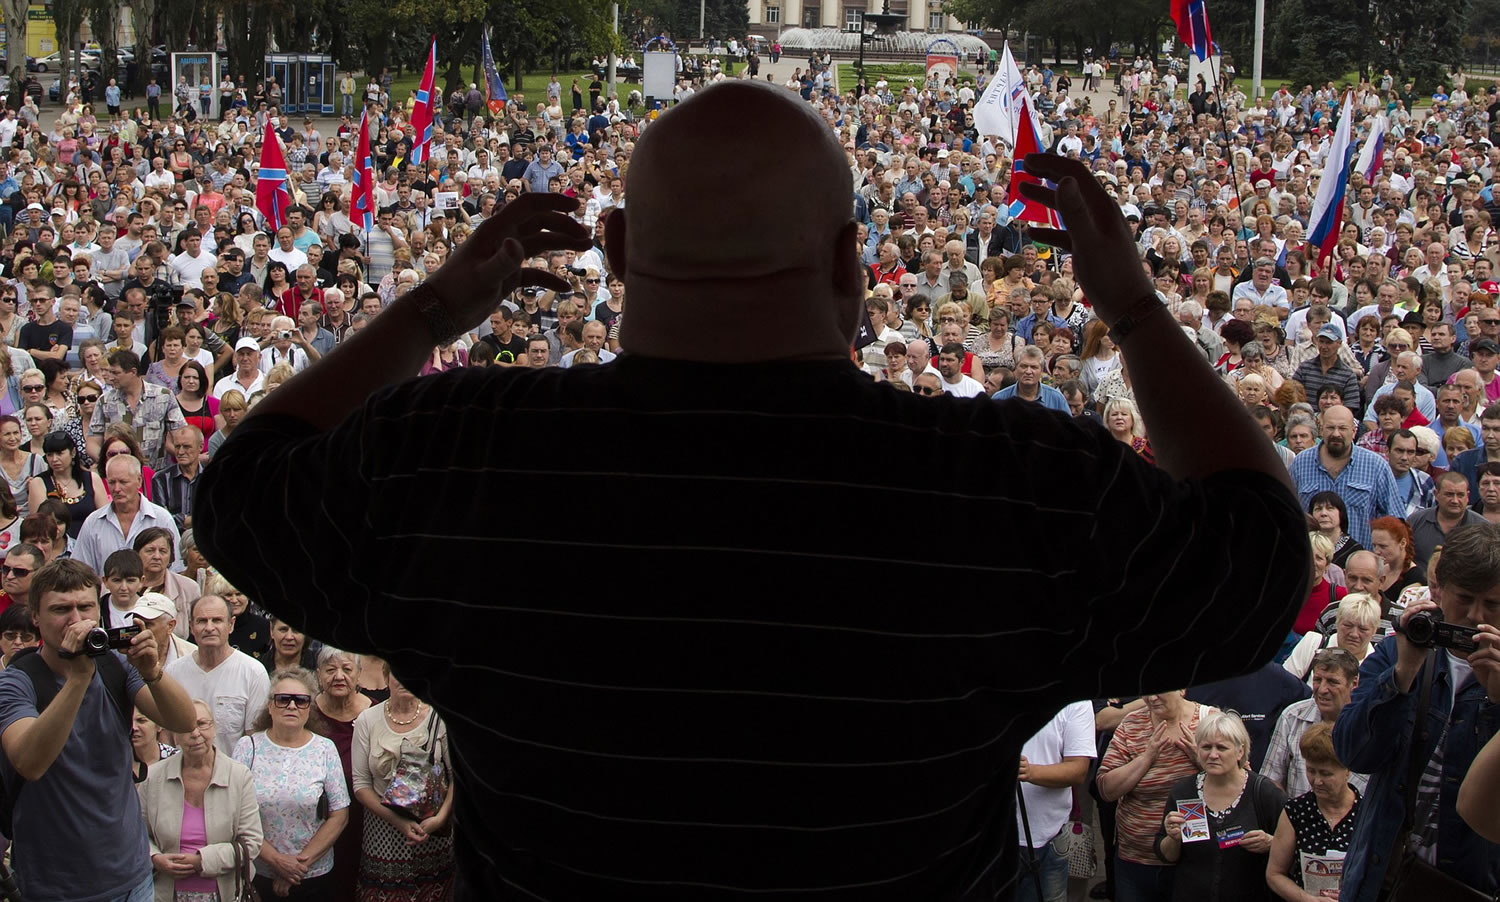 People listen to a pro-Russian activist during a meeting in the city of Donetsk, eastern Ukraine, on Sunday.